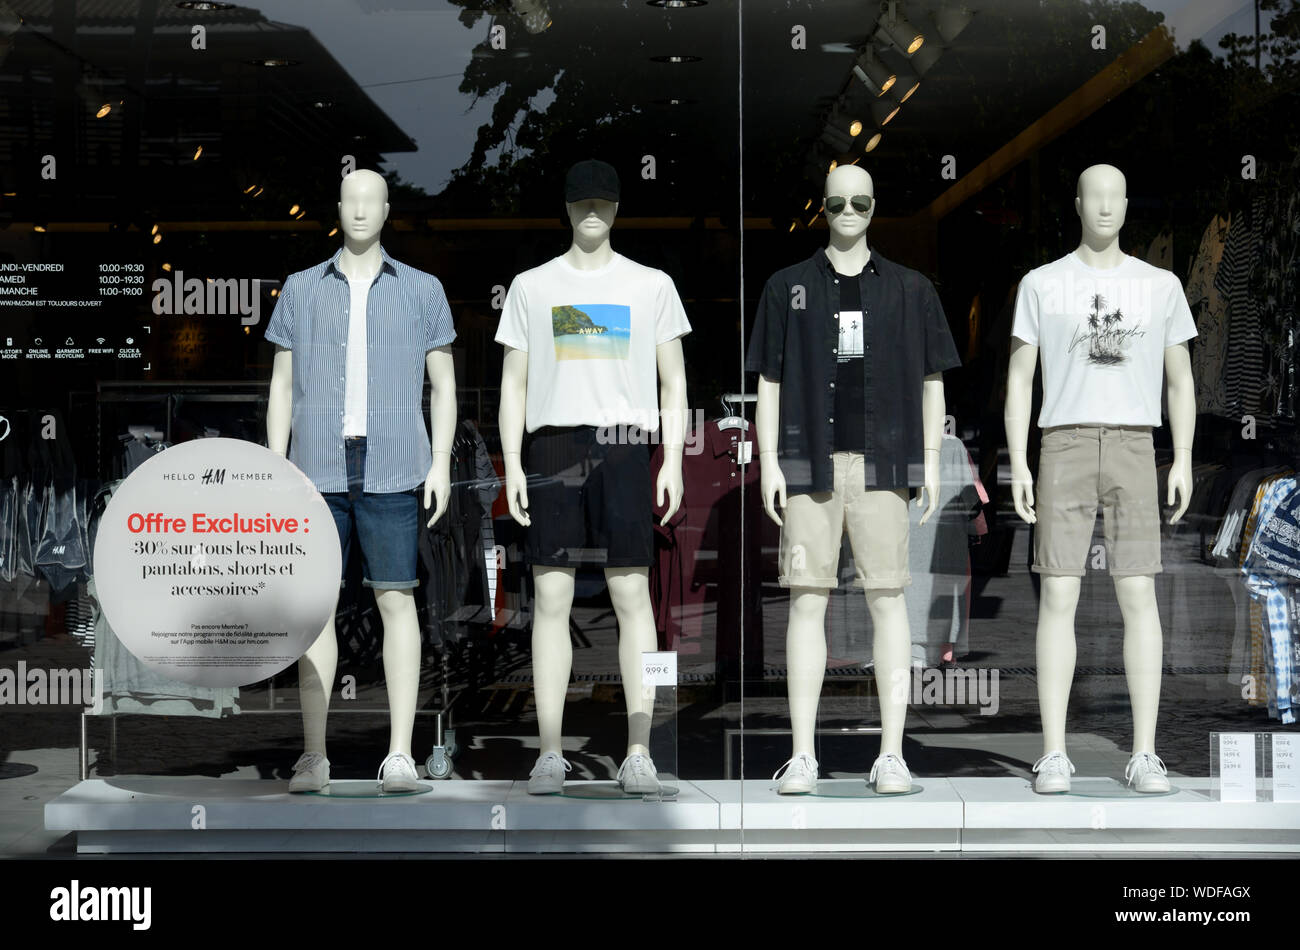 Male Dummies Wearing Summer Fashions, Shorts & T-Shirts in H&M Shop Window or Fashion Store in Shopping Mall Aix-en-Provence Provence France Stock Photo